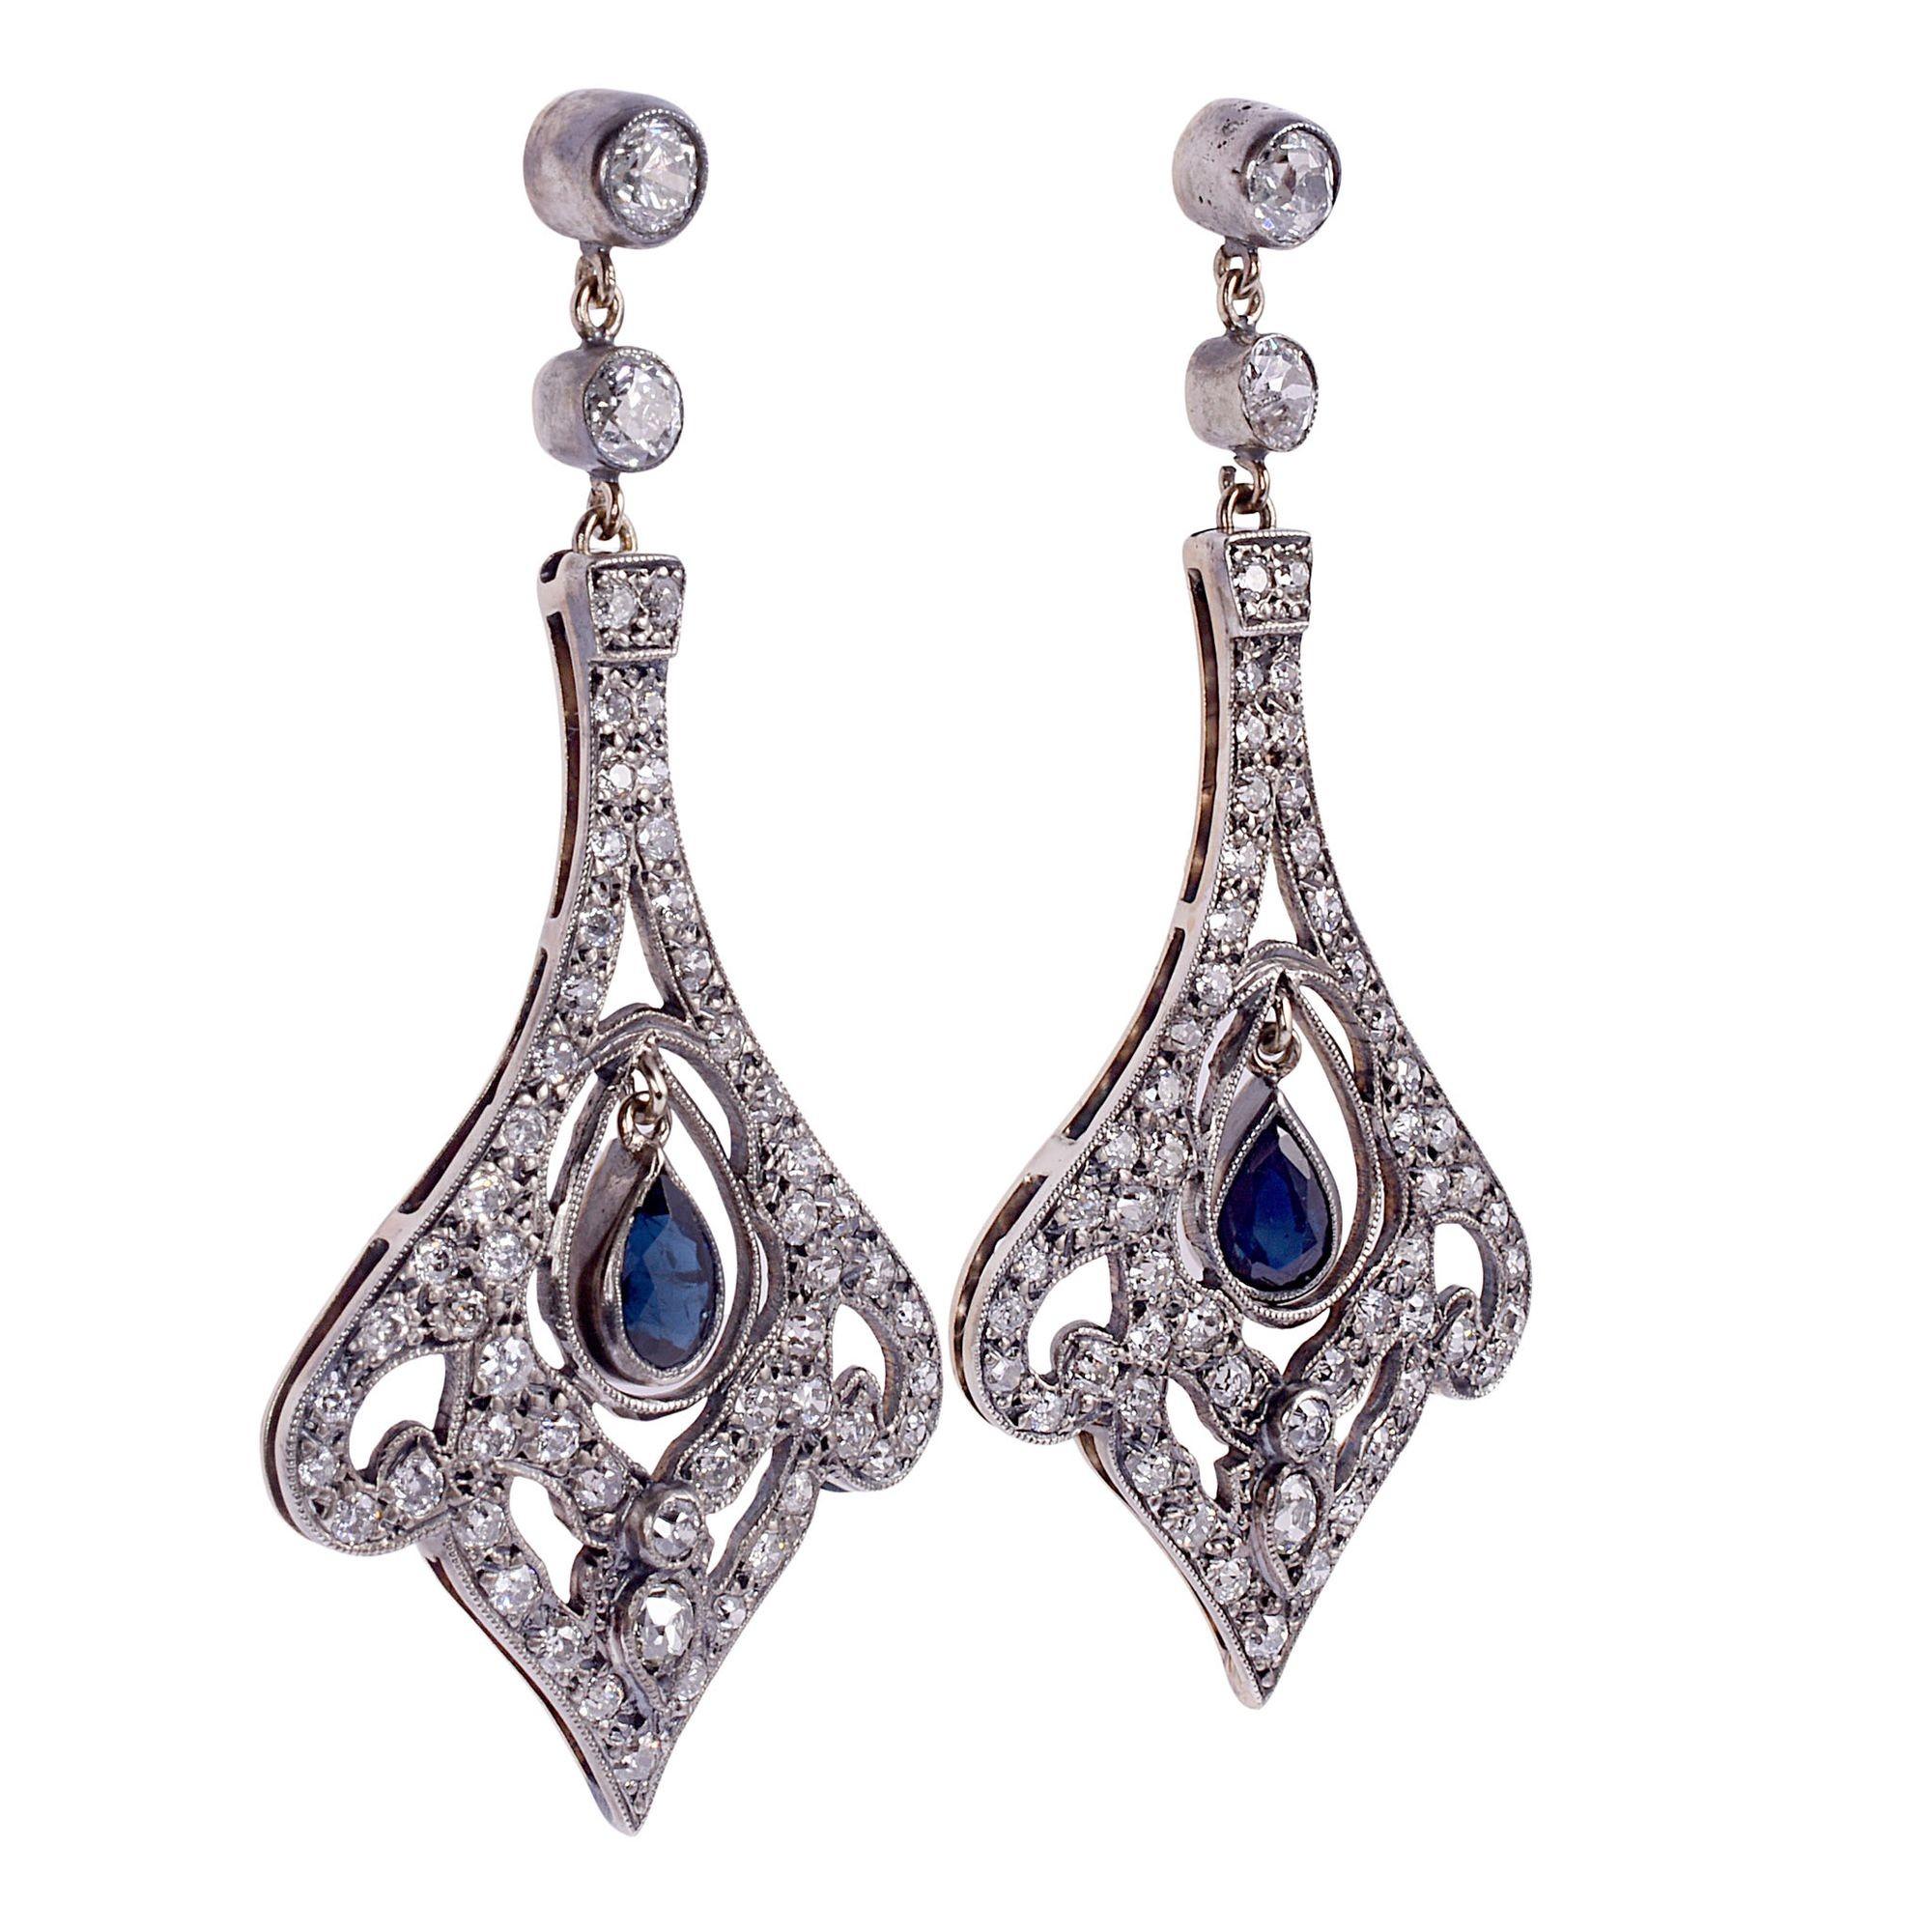 Victorian pear sapphire & diamond dangle earrings, circa 1900. The Victorian dangle earrings are crafted in 14K gold topped with silver. They feature a pear sapphire drop in the center of a pave diamond earring with milgrain detailing. The sapphires